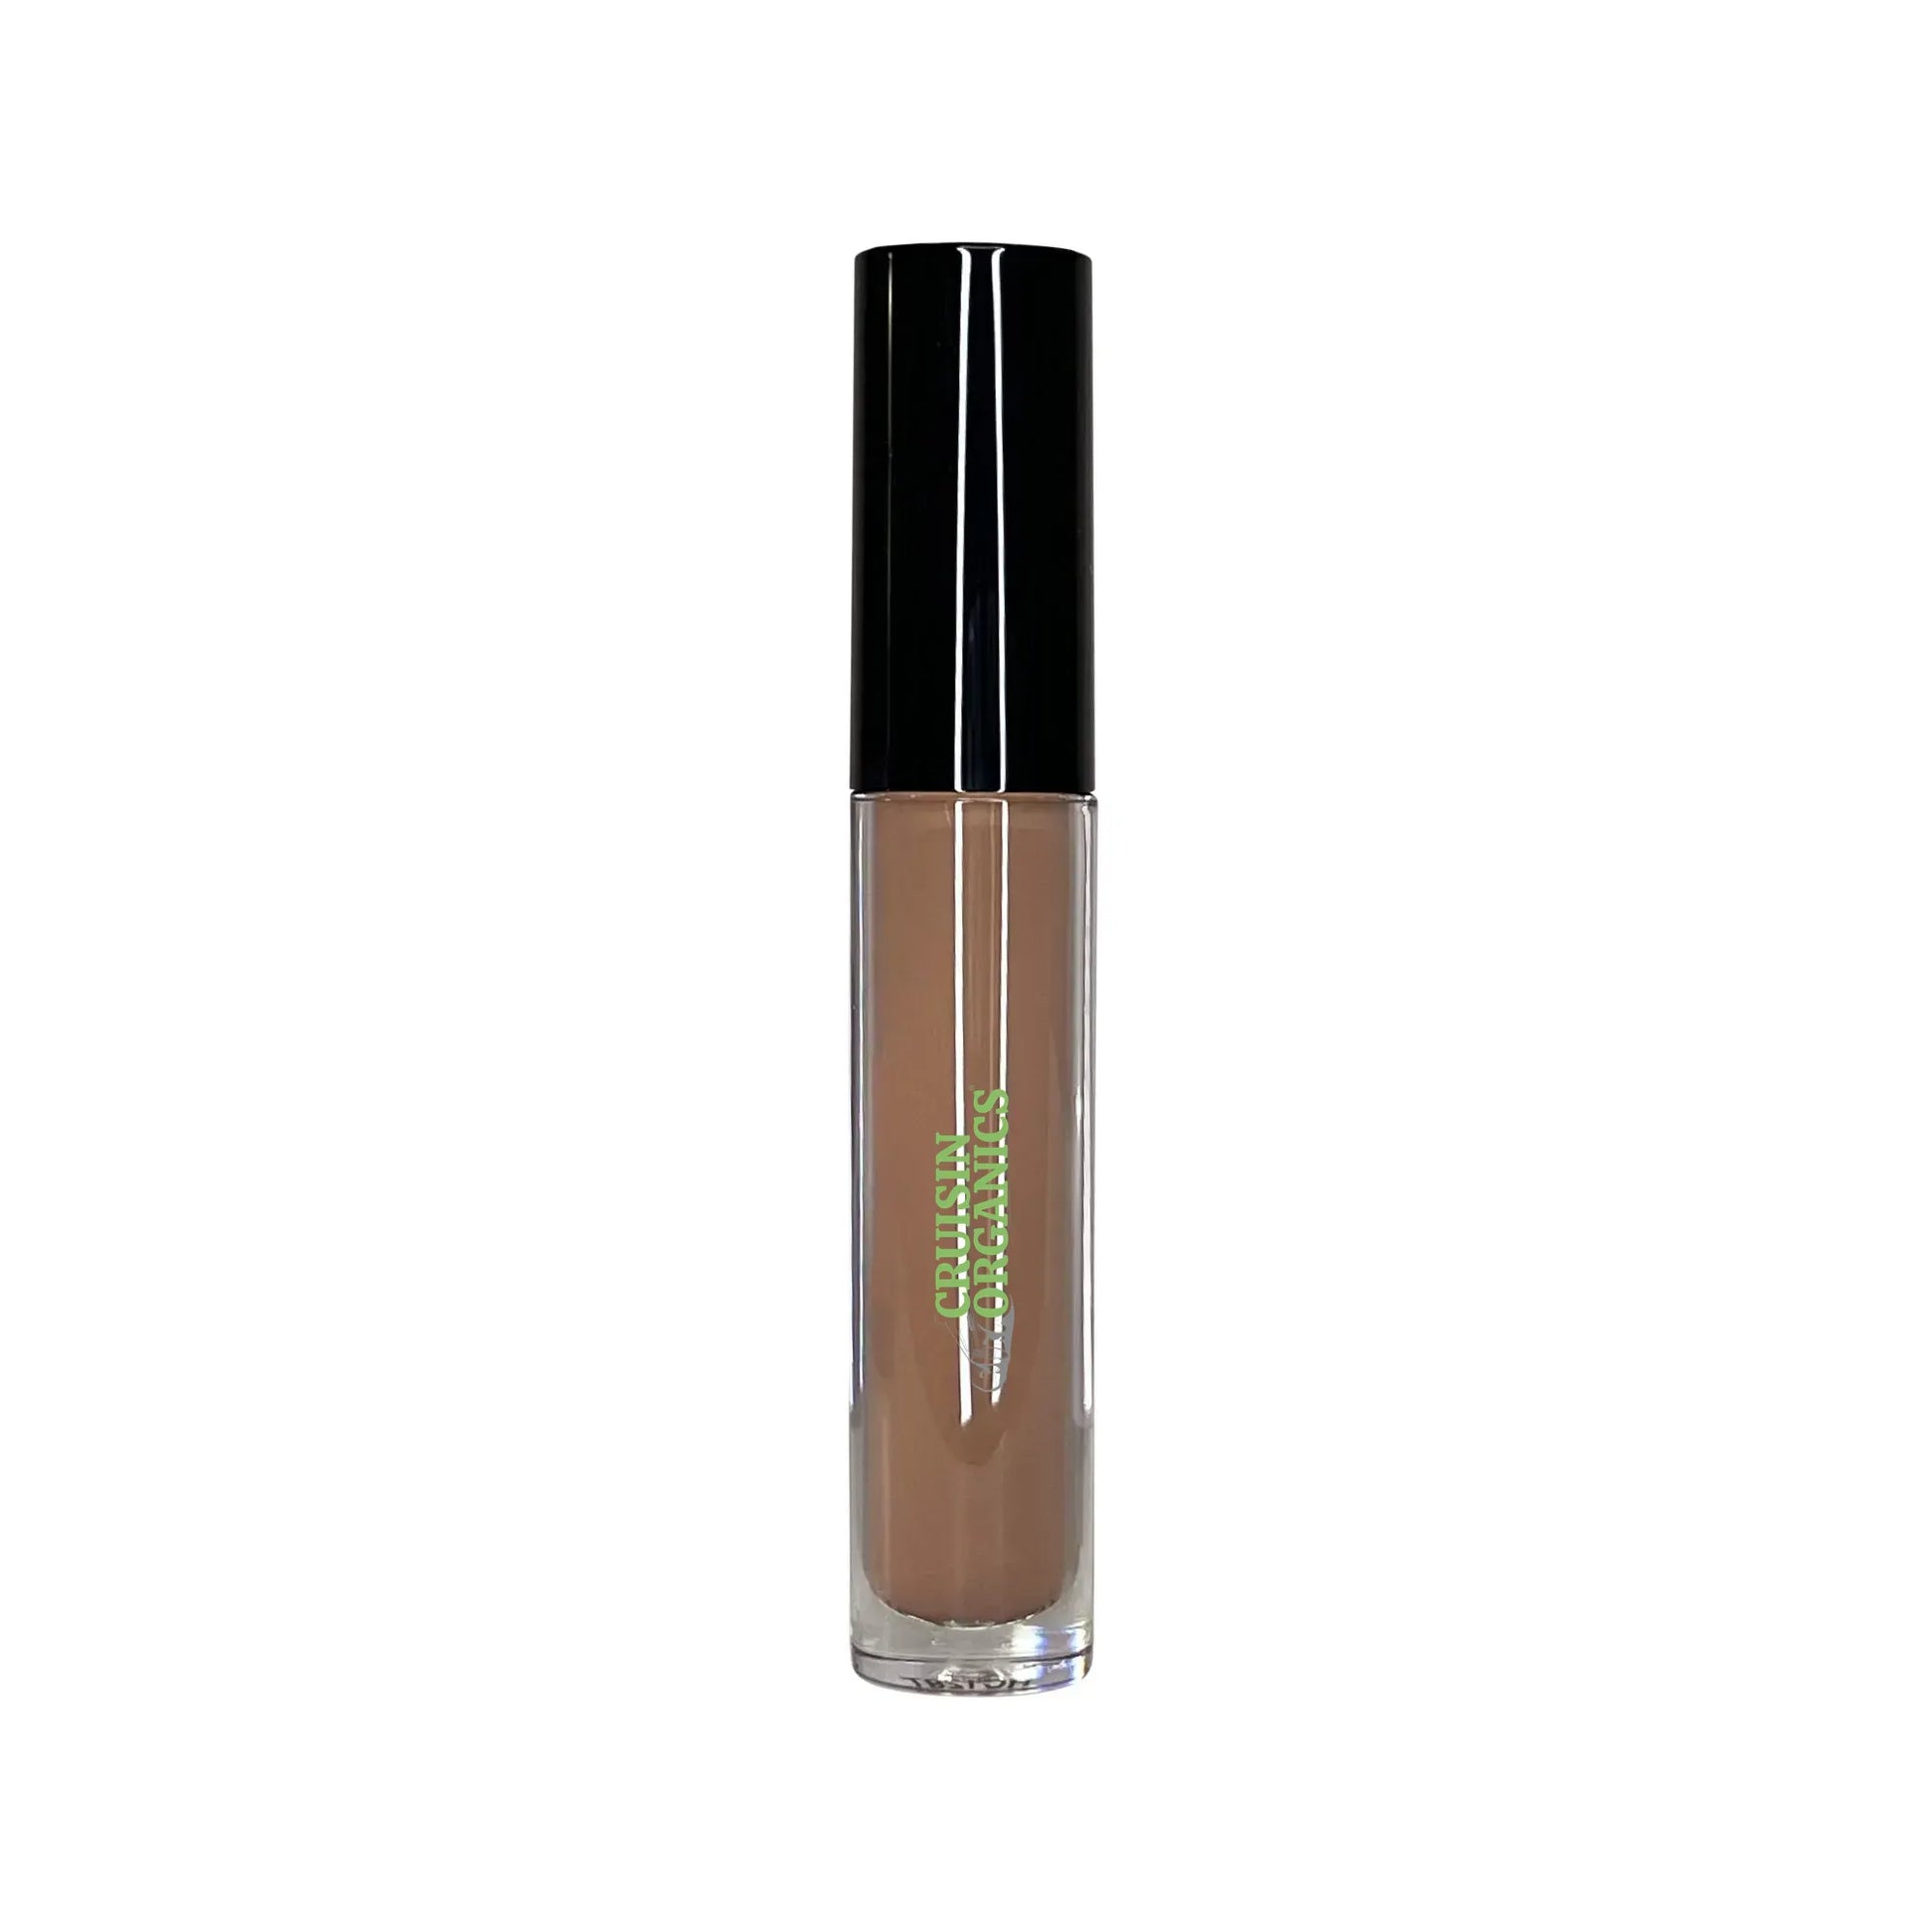 Transform uneven skin tones and conceal dark spots with Cruisin Organics Dark Toffee Concealing Cream. This product is a highly effective spot treatment and color corrector, providing full coverage for your skin. The doe-shaped applicator, designed to resemble a female deer's hoof, has a soft slanted sponge for precise and smooth makeup application.